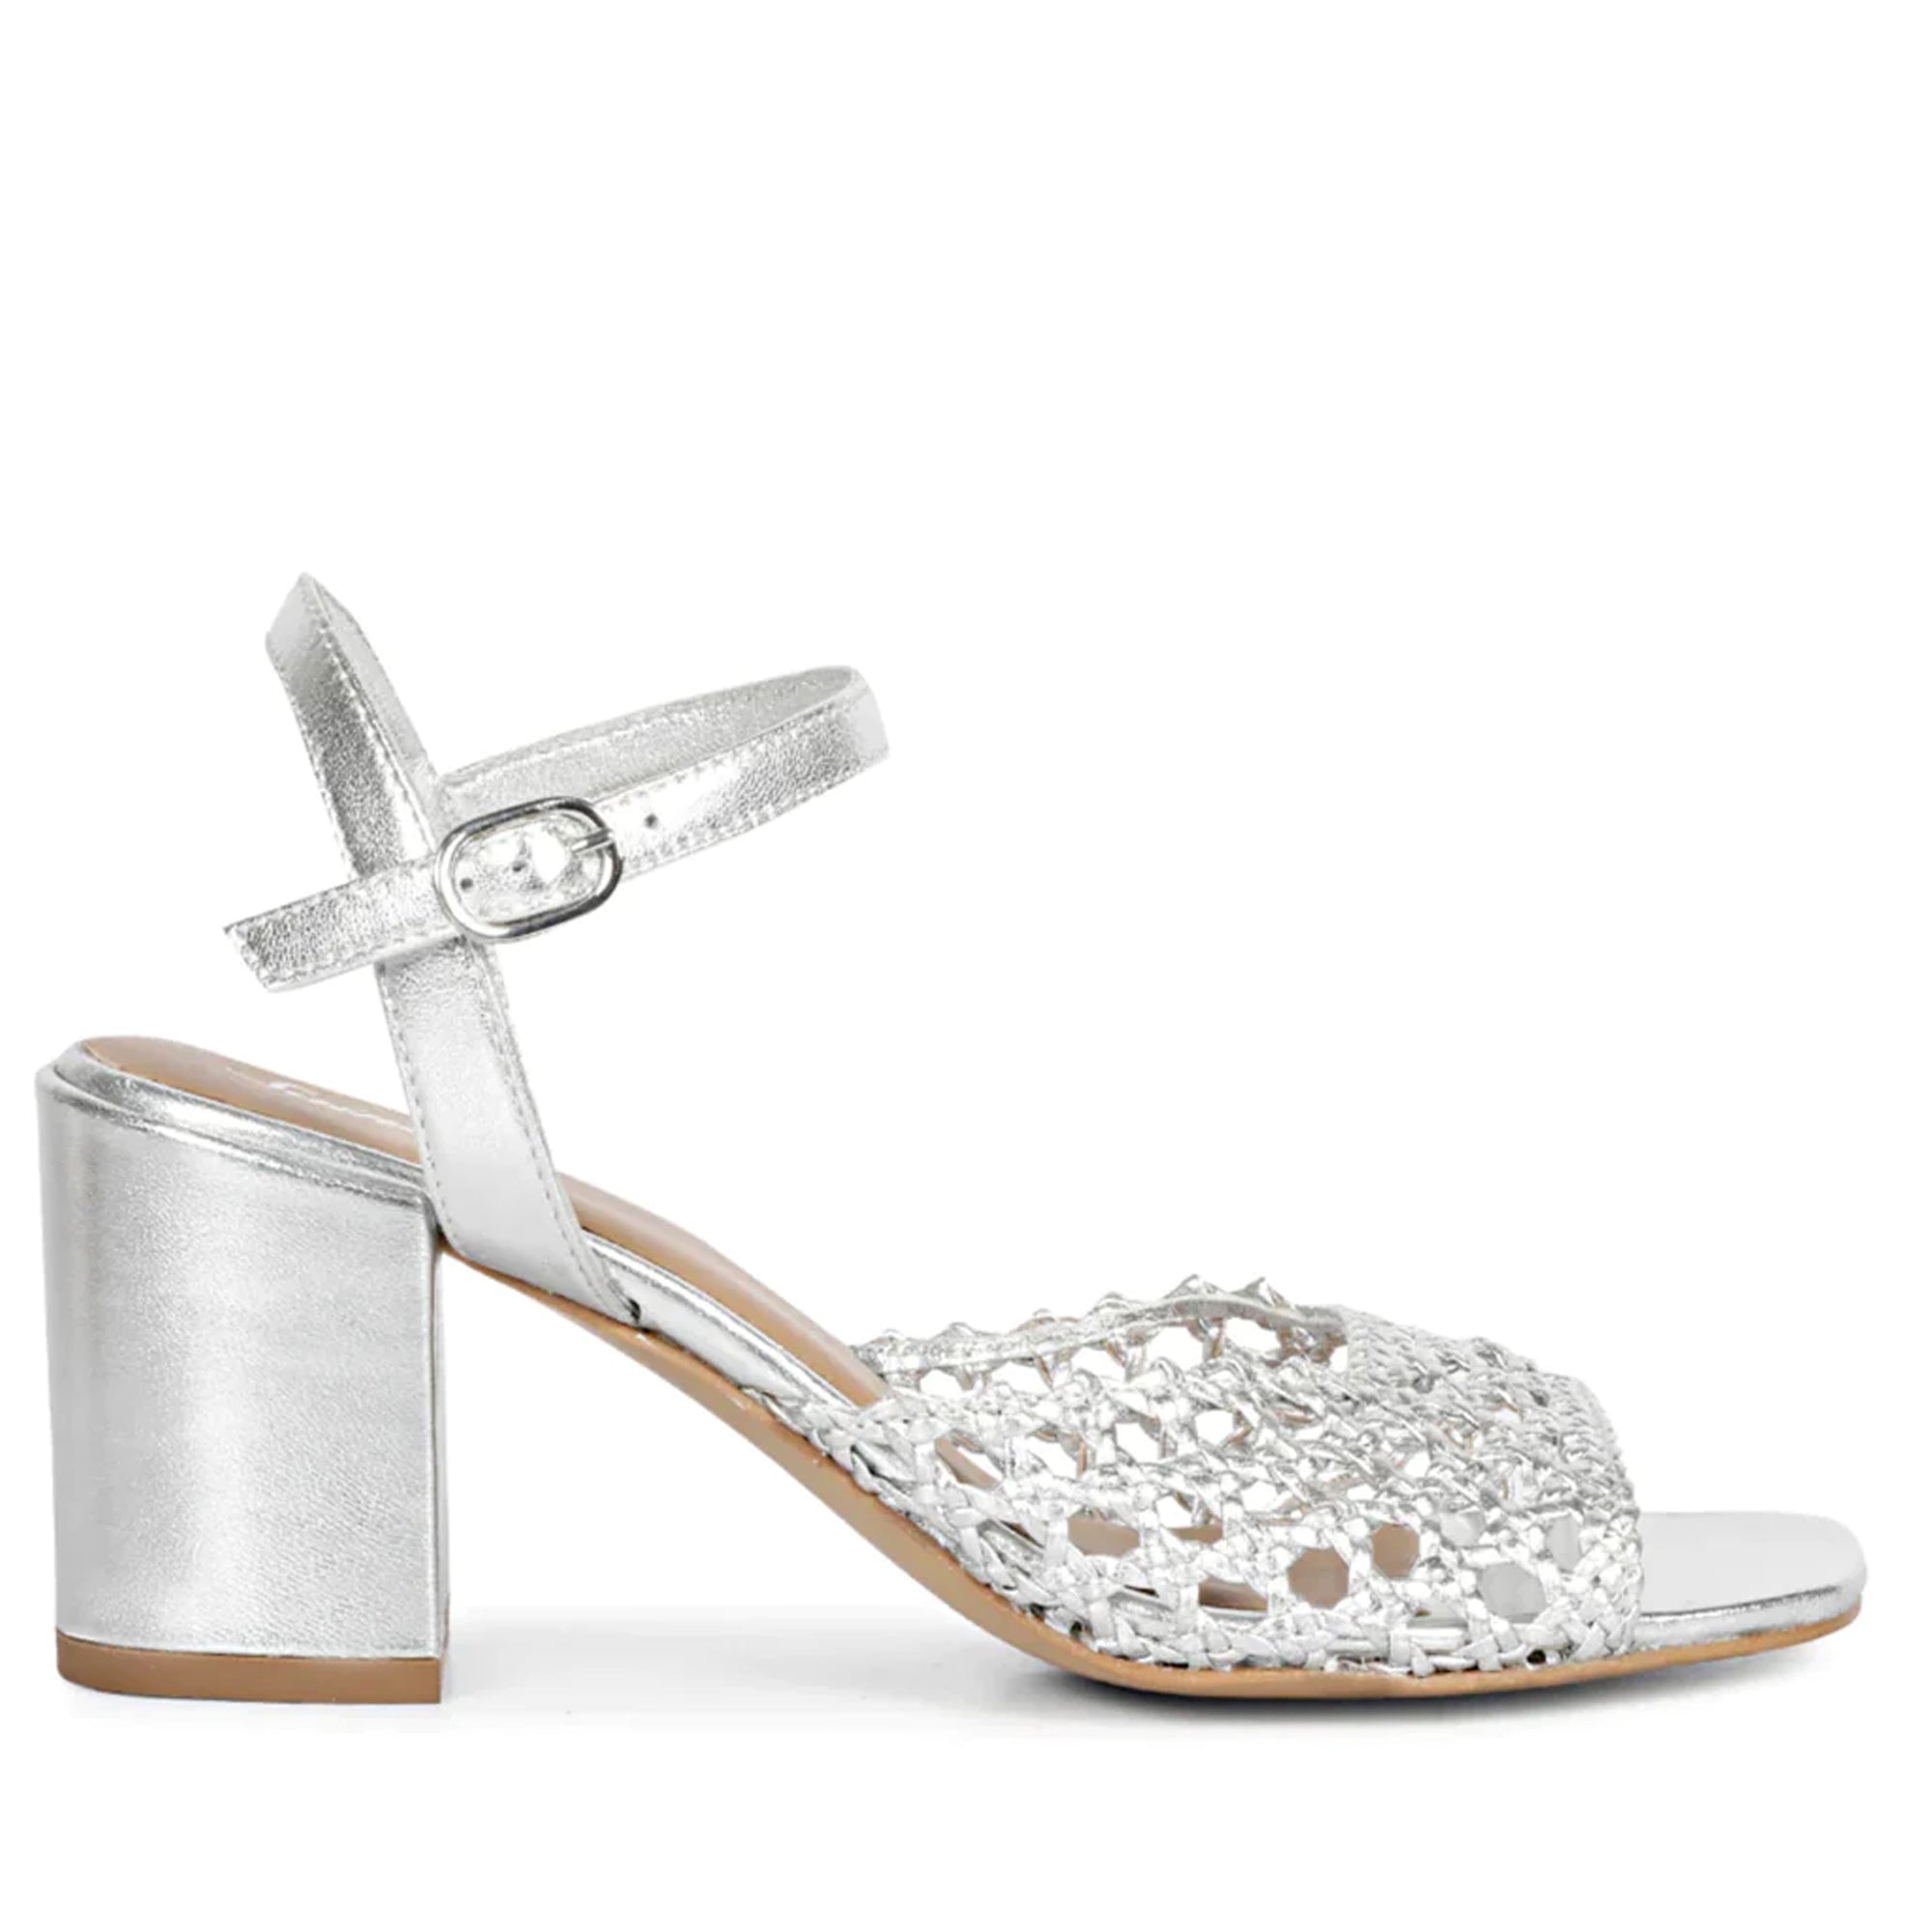 Heels & Wedges in the color silver for Women on sale | FASHIOLA INDIA